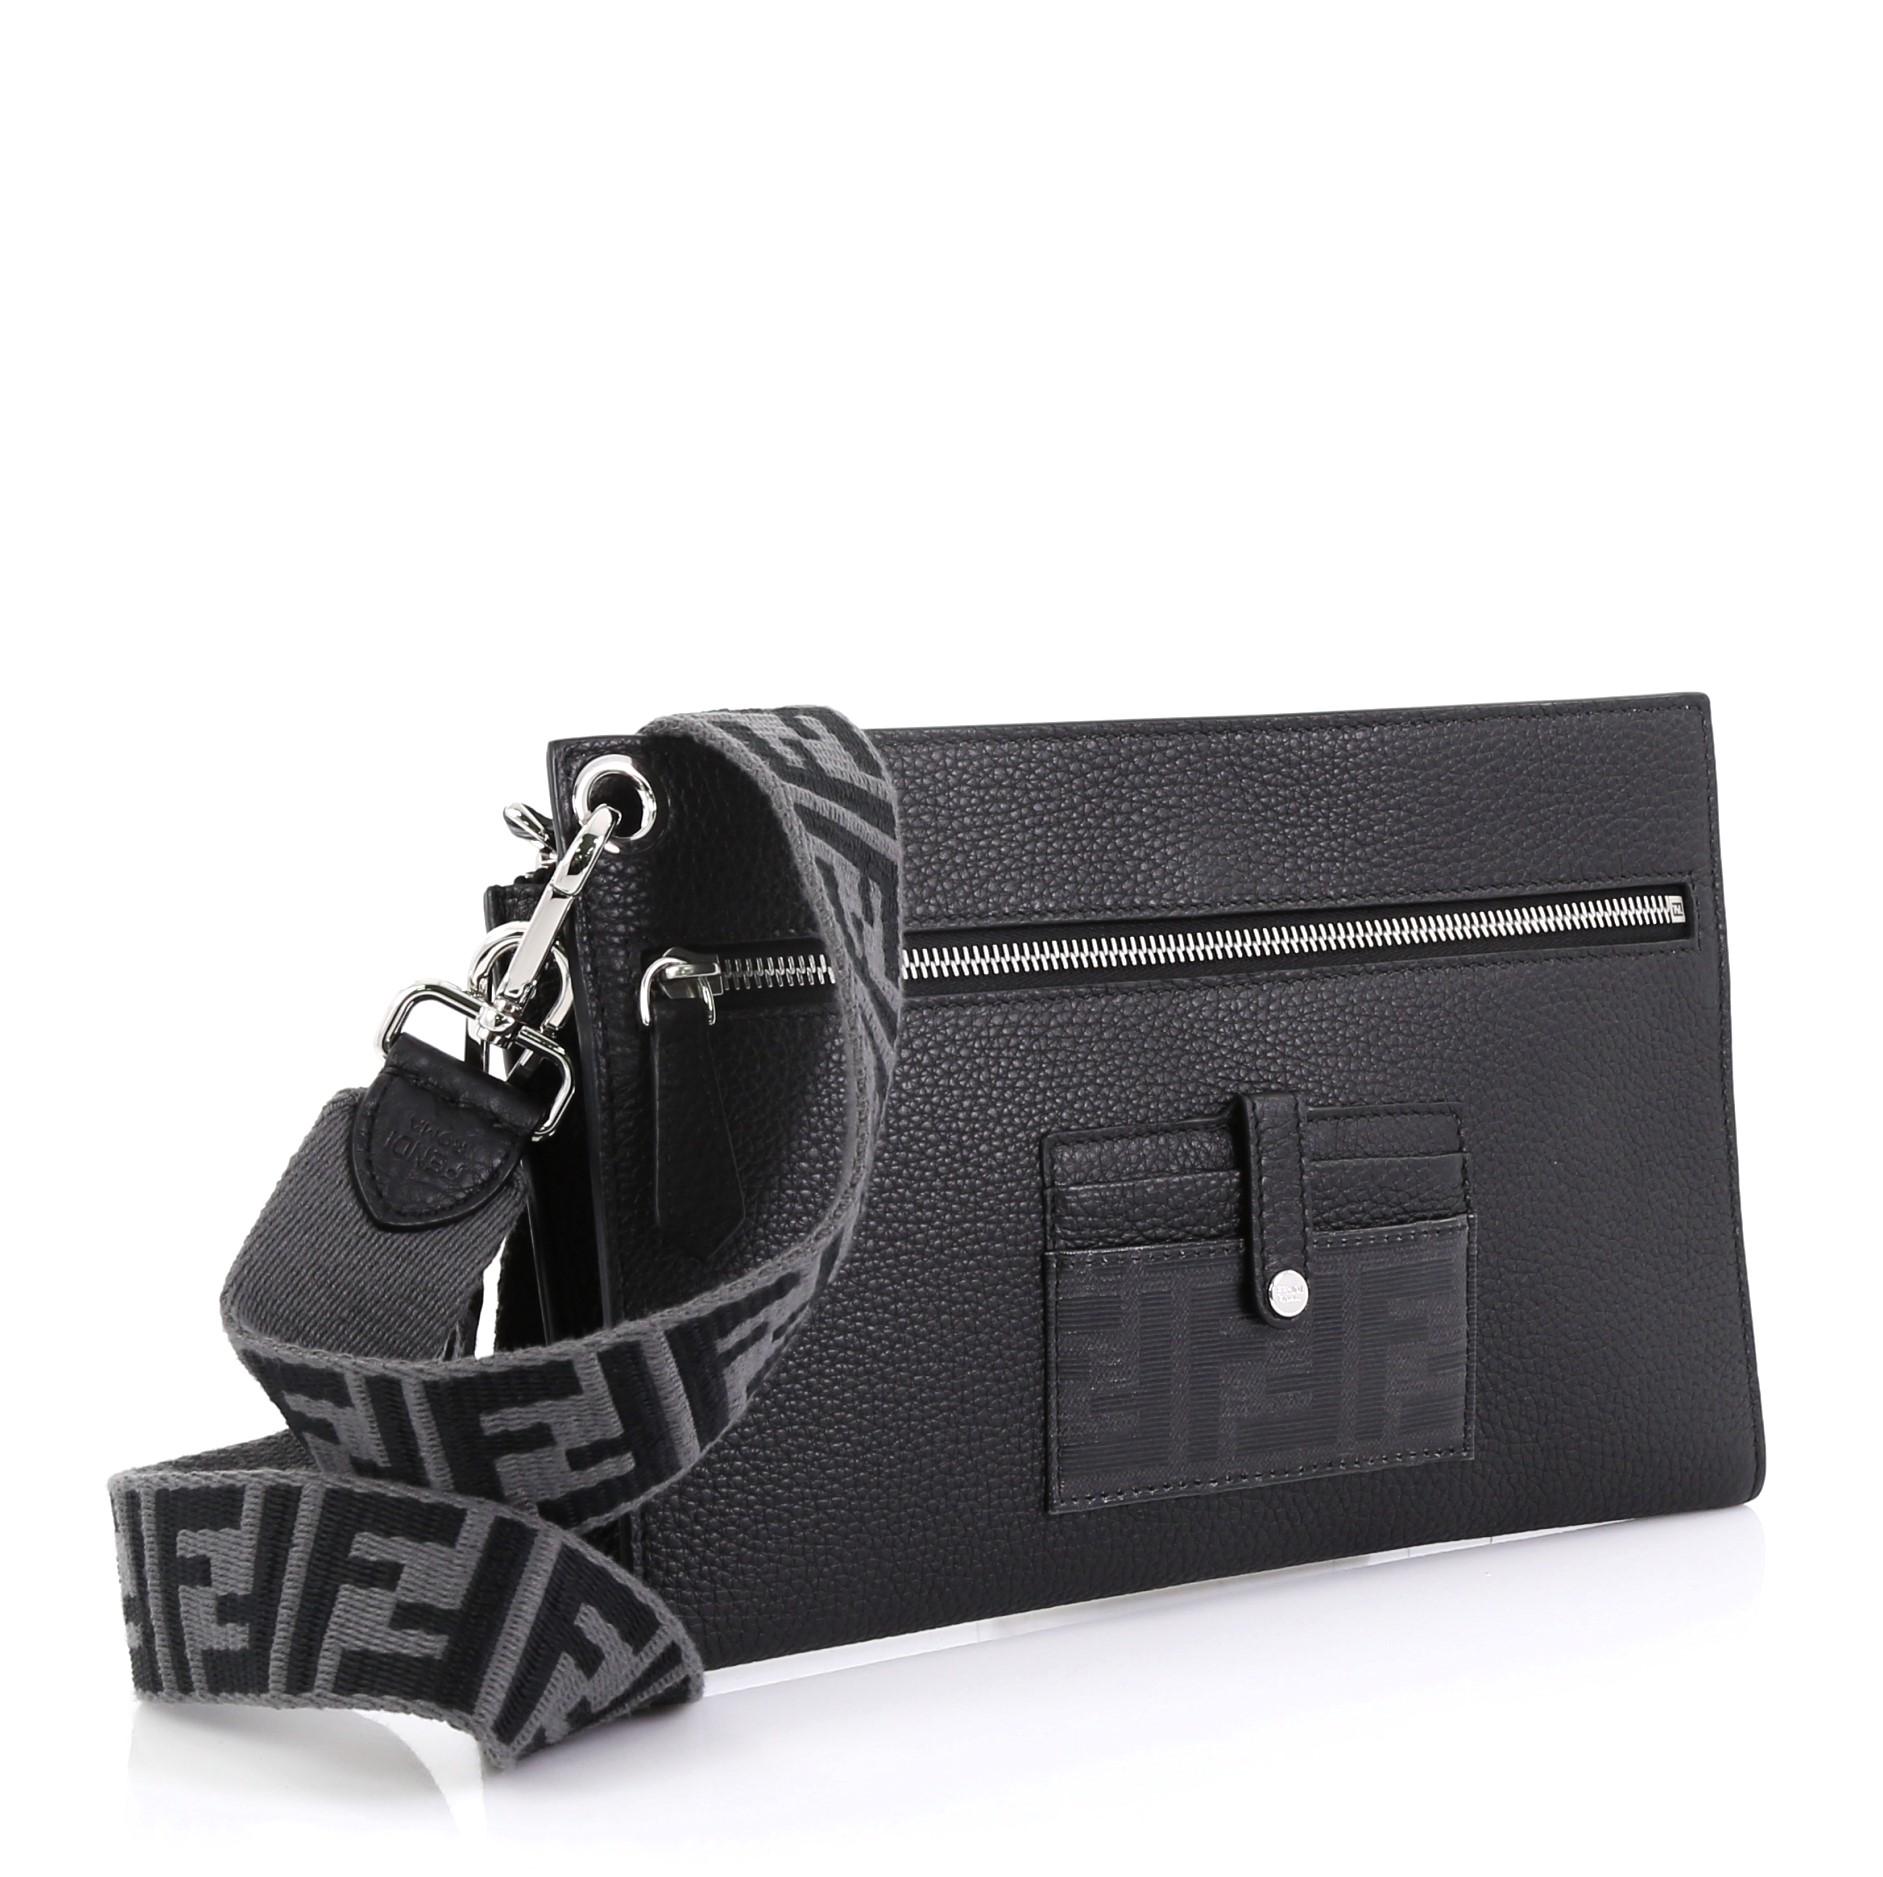 This Fendi Flat Pouch Crossbody Bag Leather Medium, crafted from black leather, features a detachable shoulder strap, front zip pocket, and silver-tone hardware. Its snap button closure opens to a black leather interior with multiple card slots and